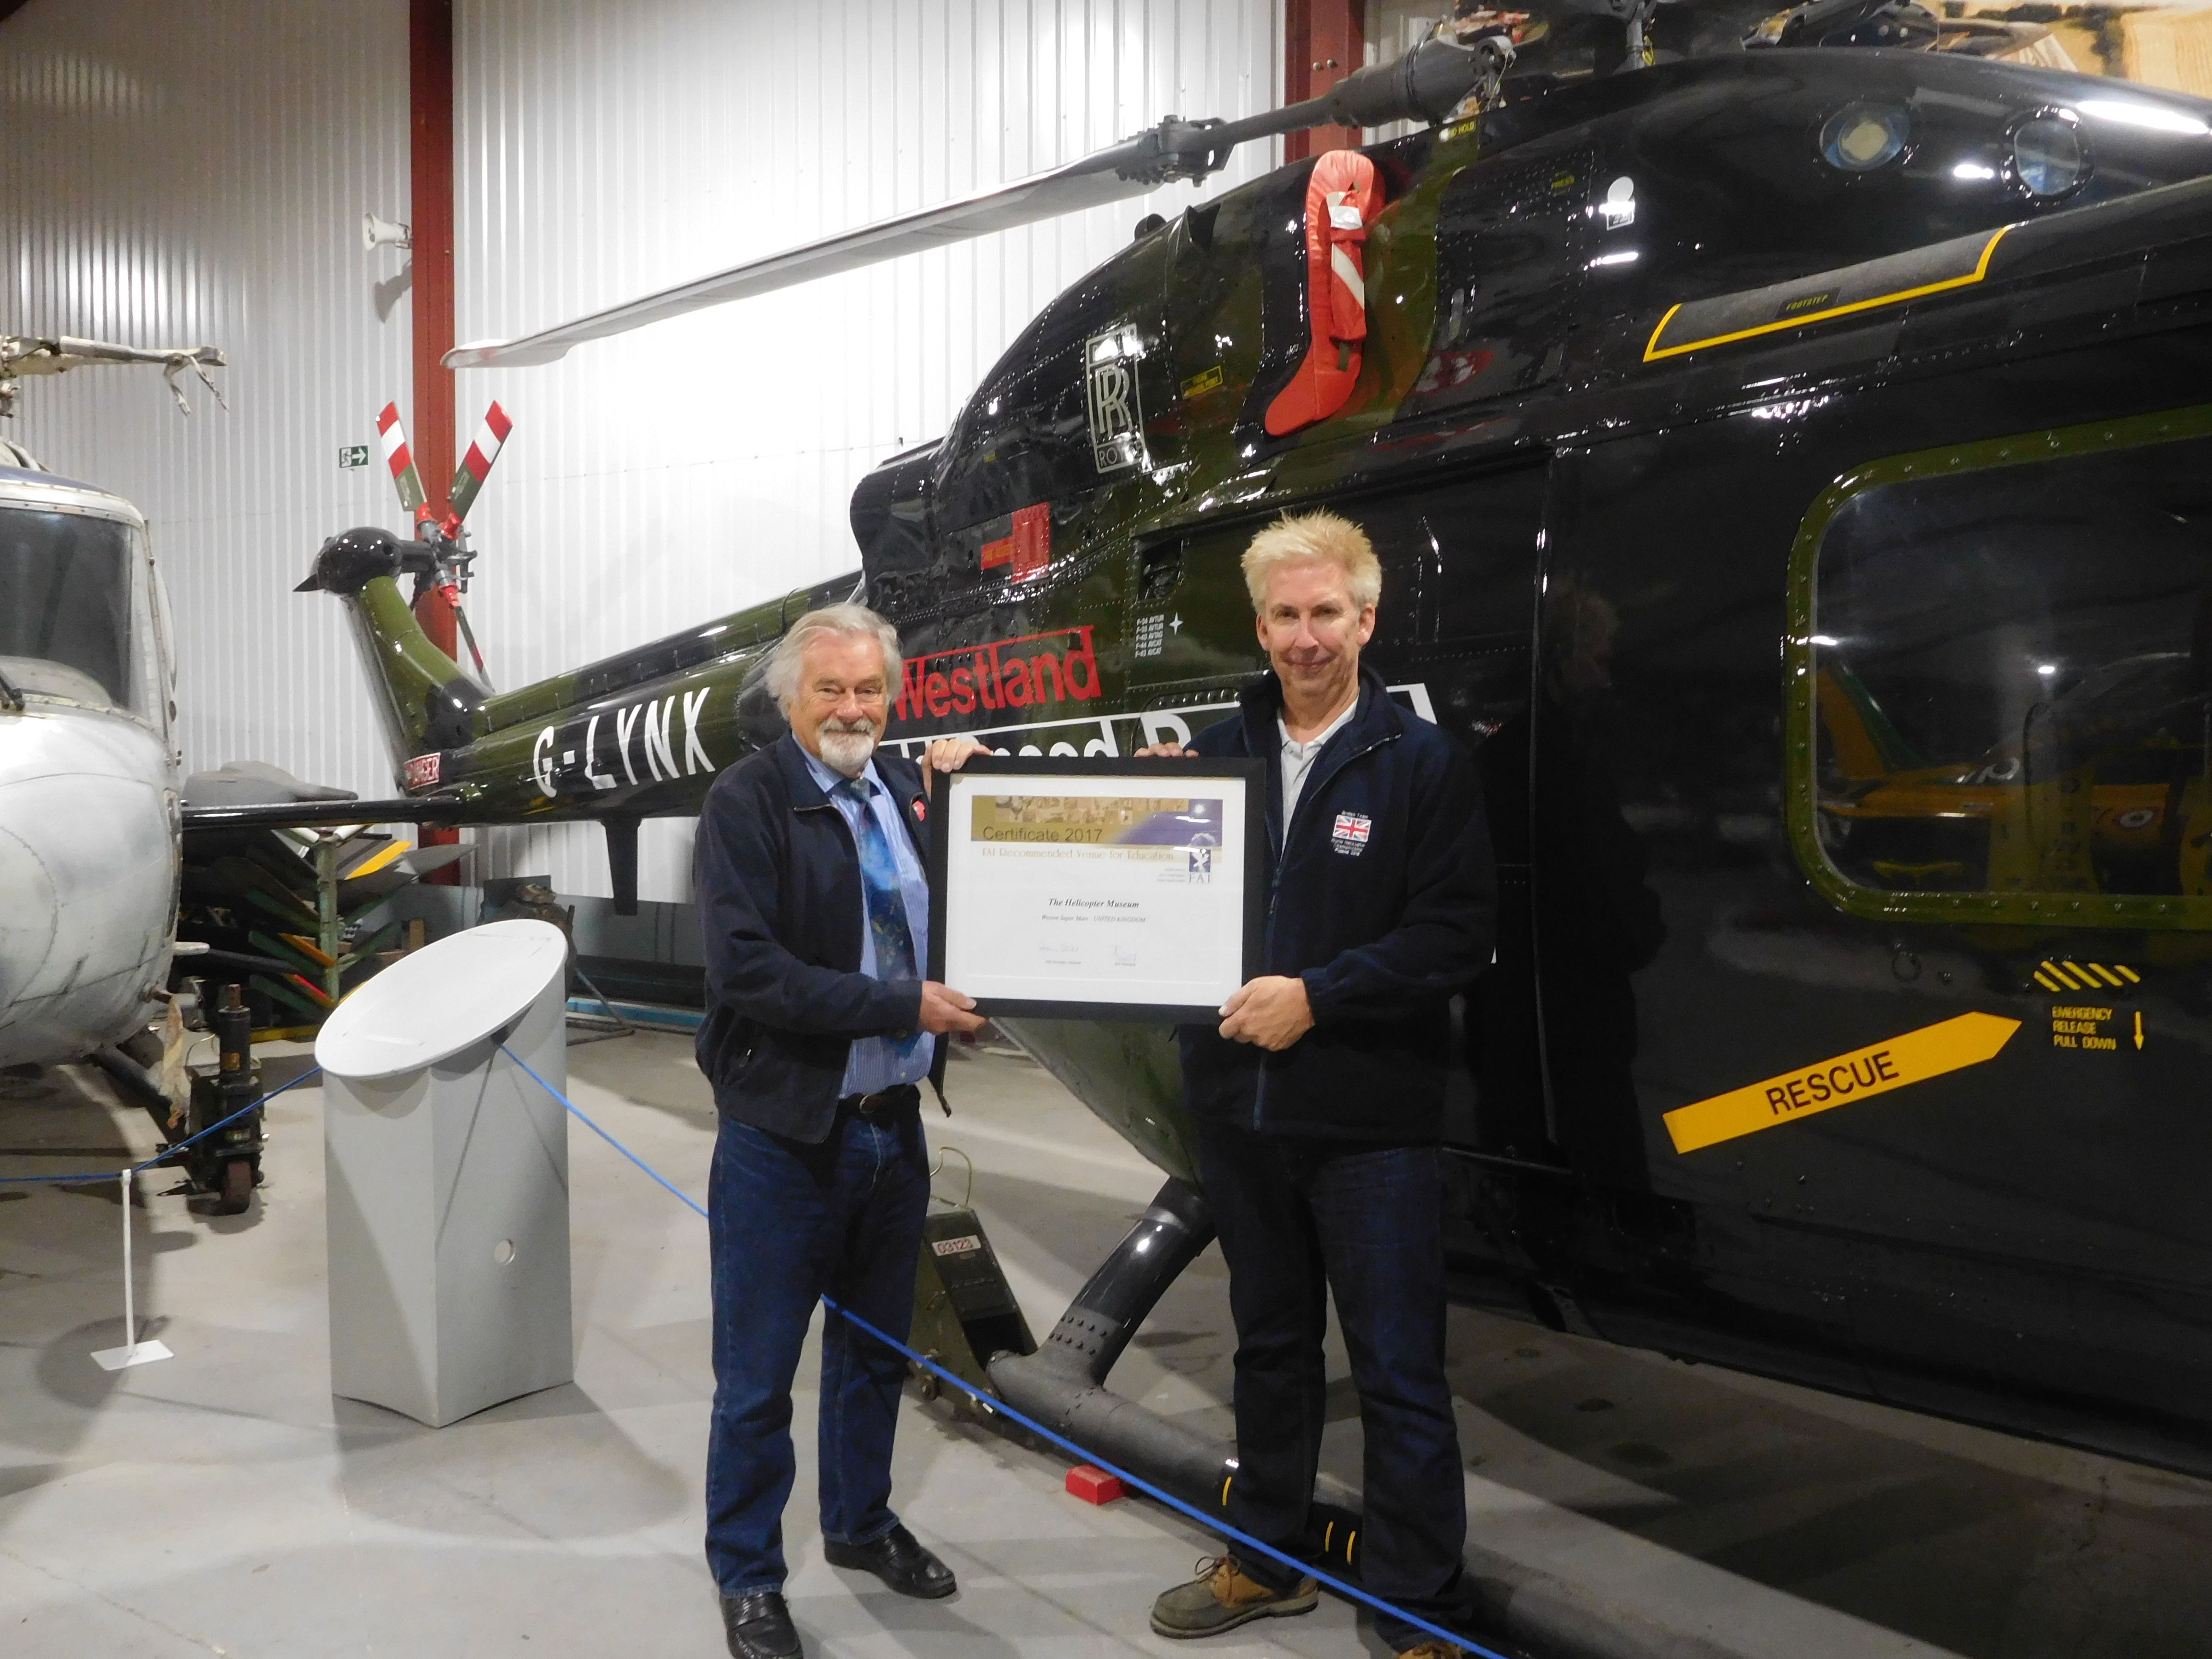 The award was presented to the museum's founder, Elfan Ap Rees, in front of the world speed record holder G-LYNX by U.K. representative of the FAI, David Monks. The Helicopter Museum Photo